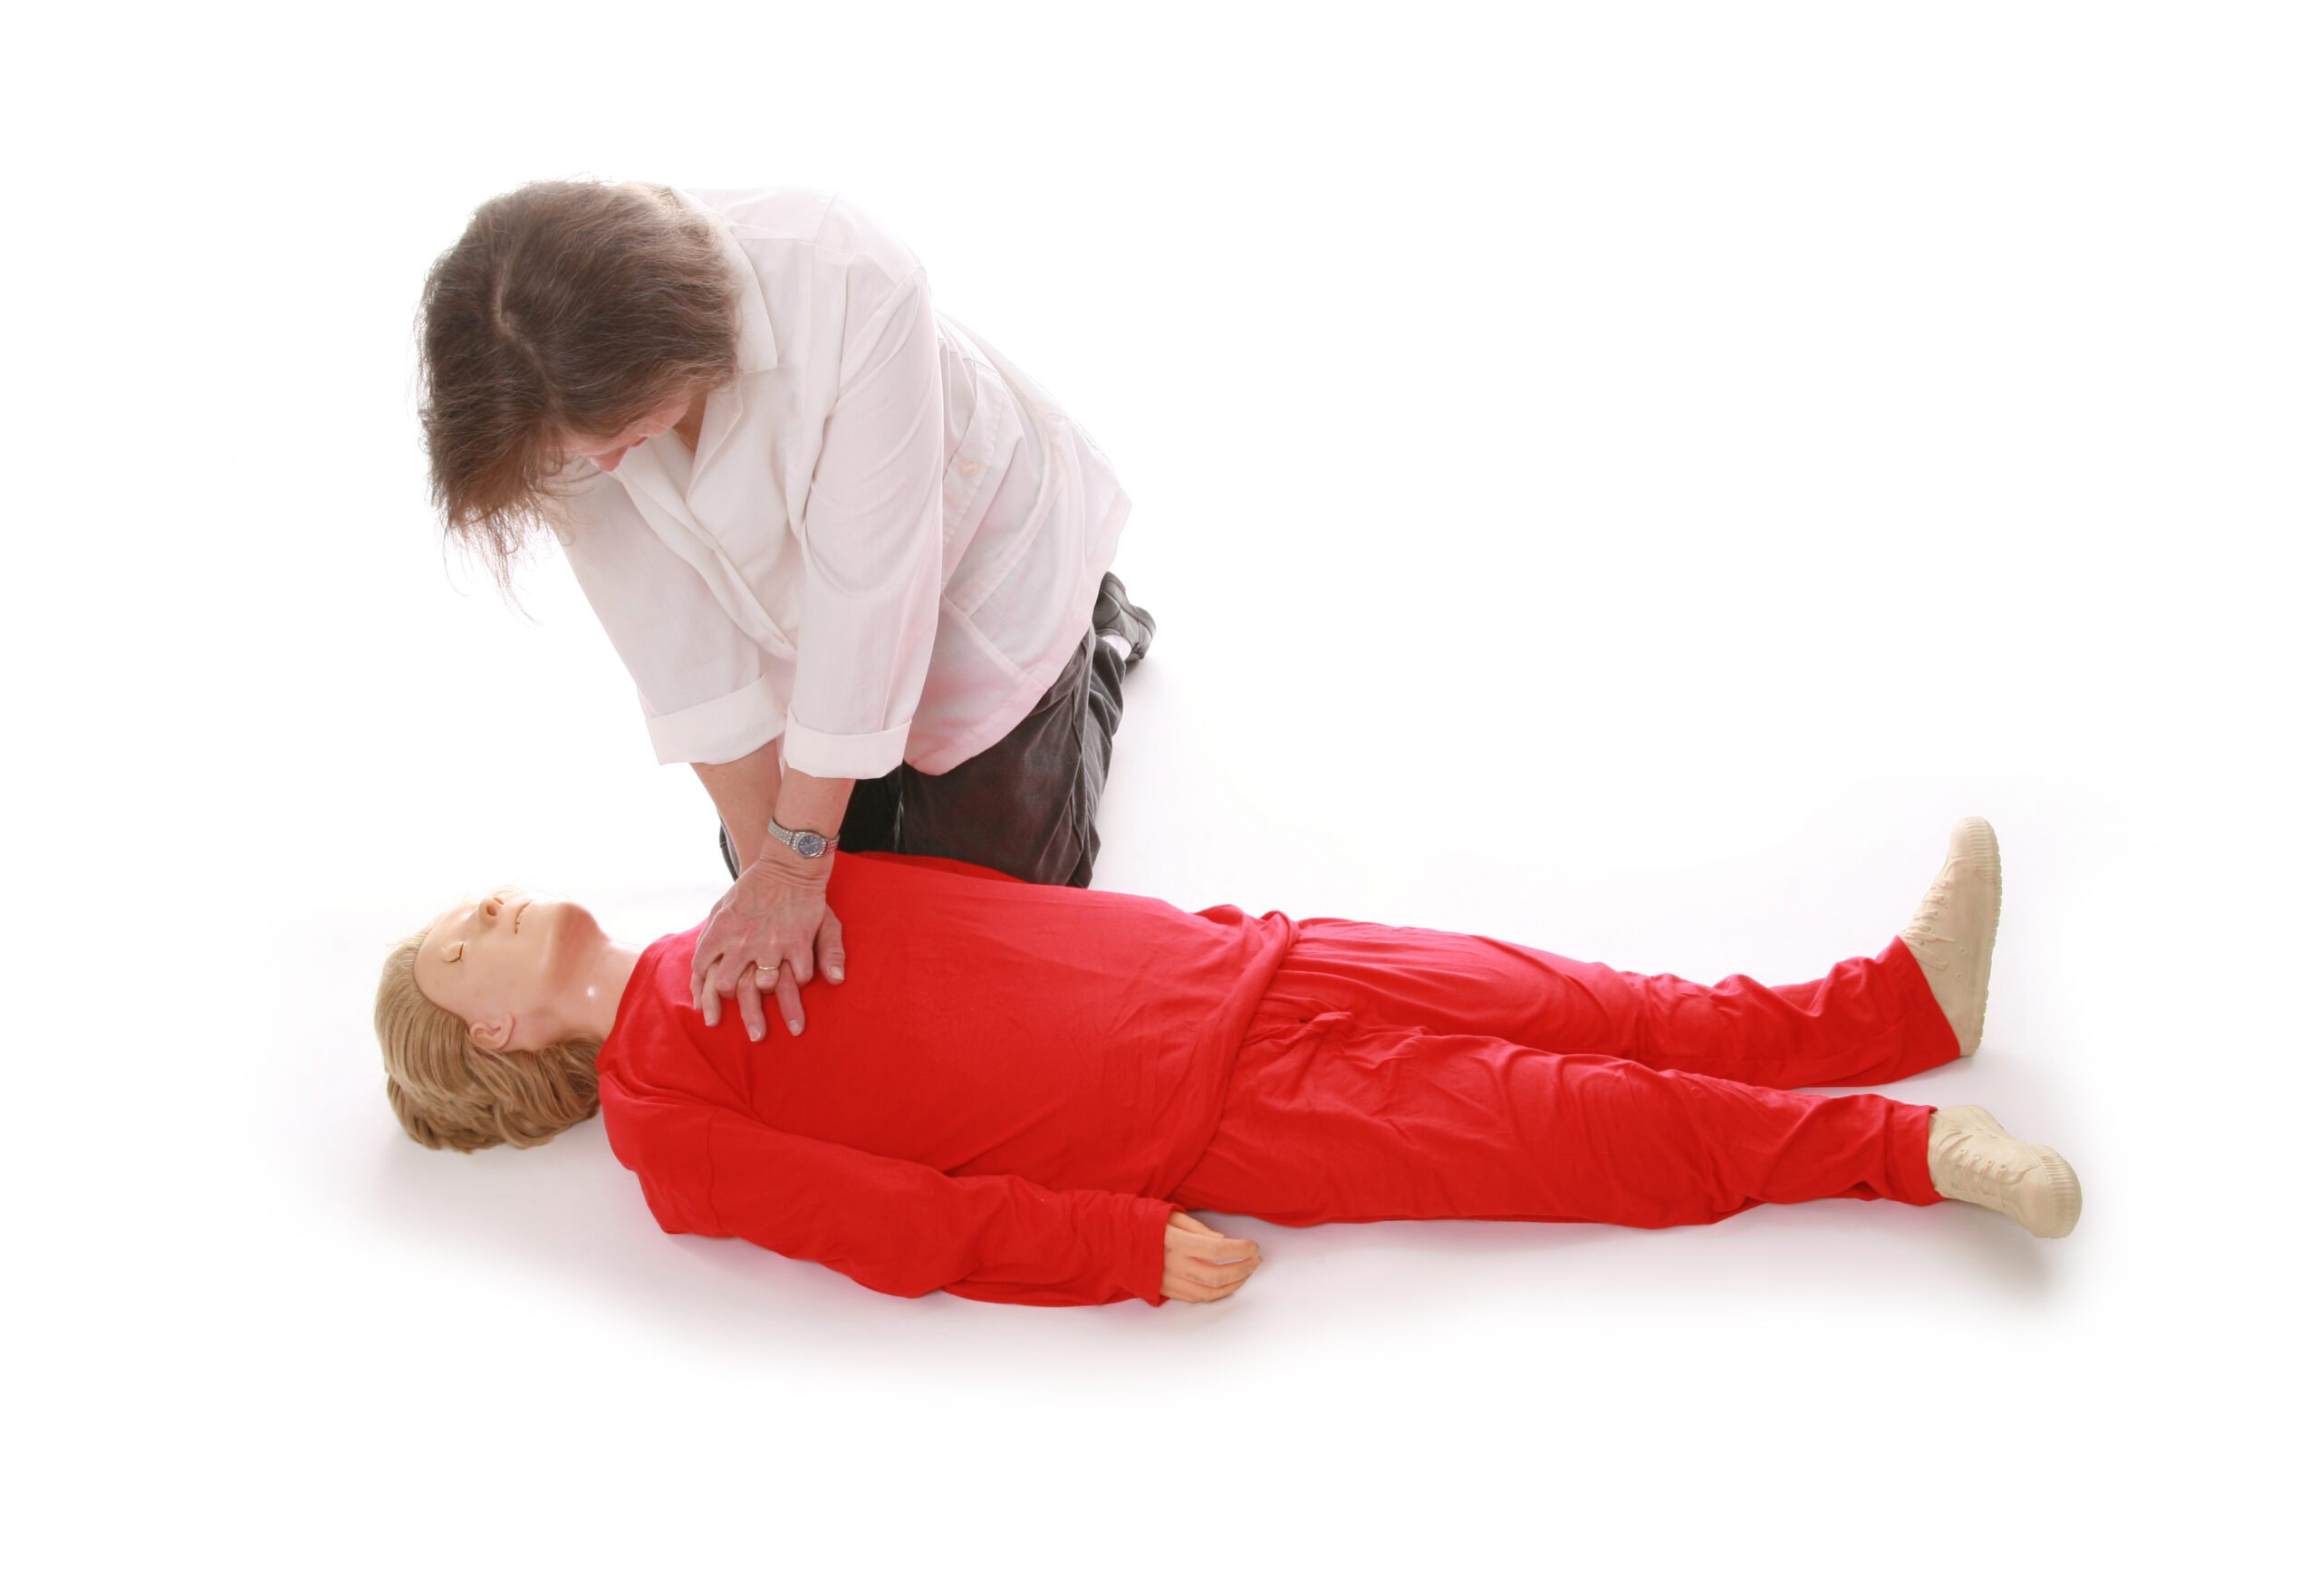 A woman performing chest compressions on a mannequin